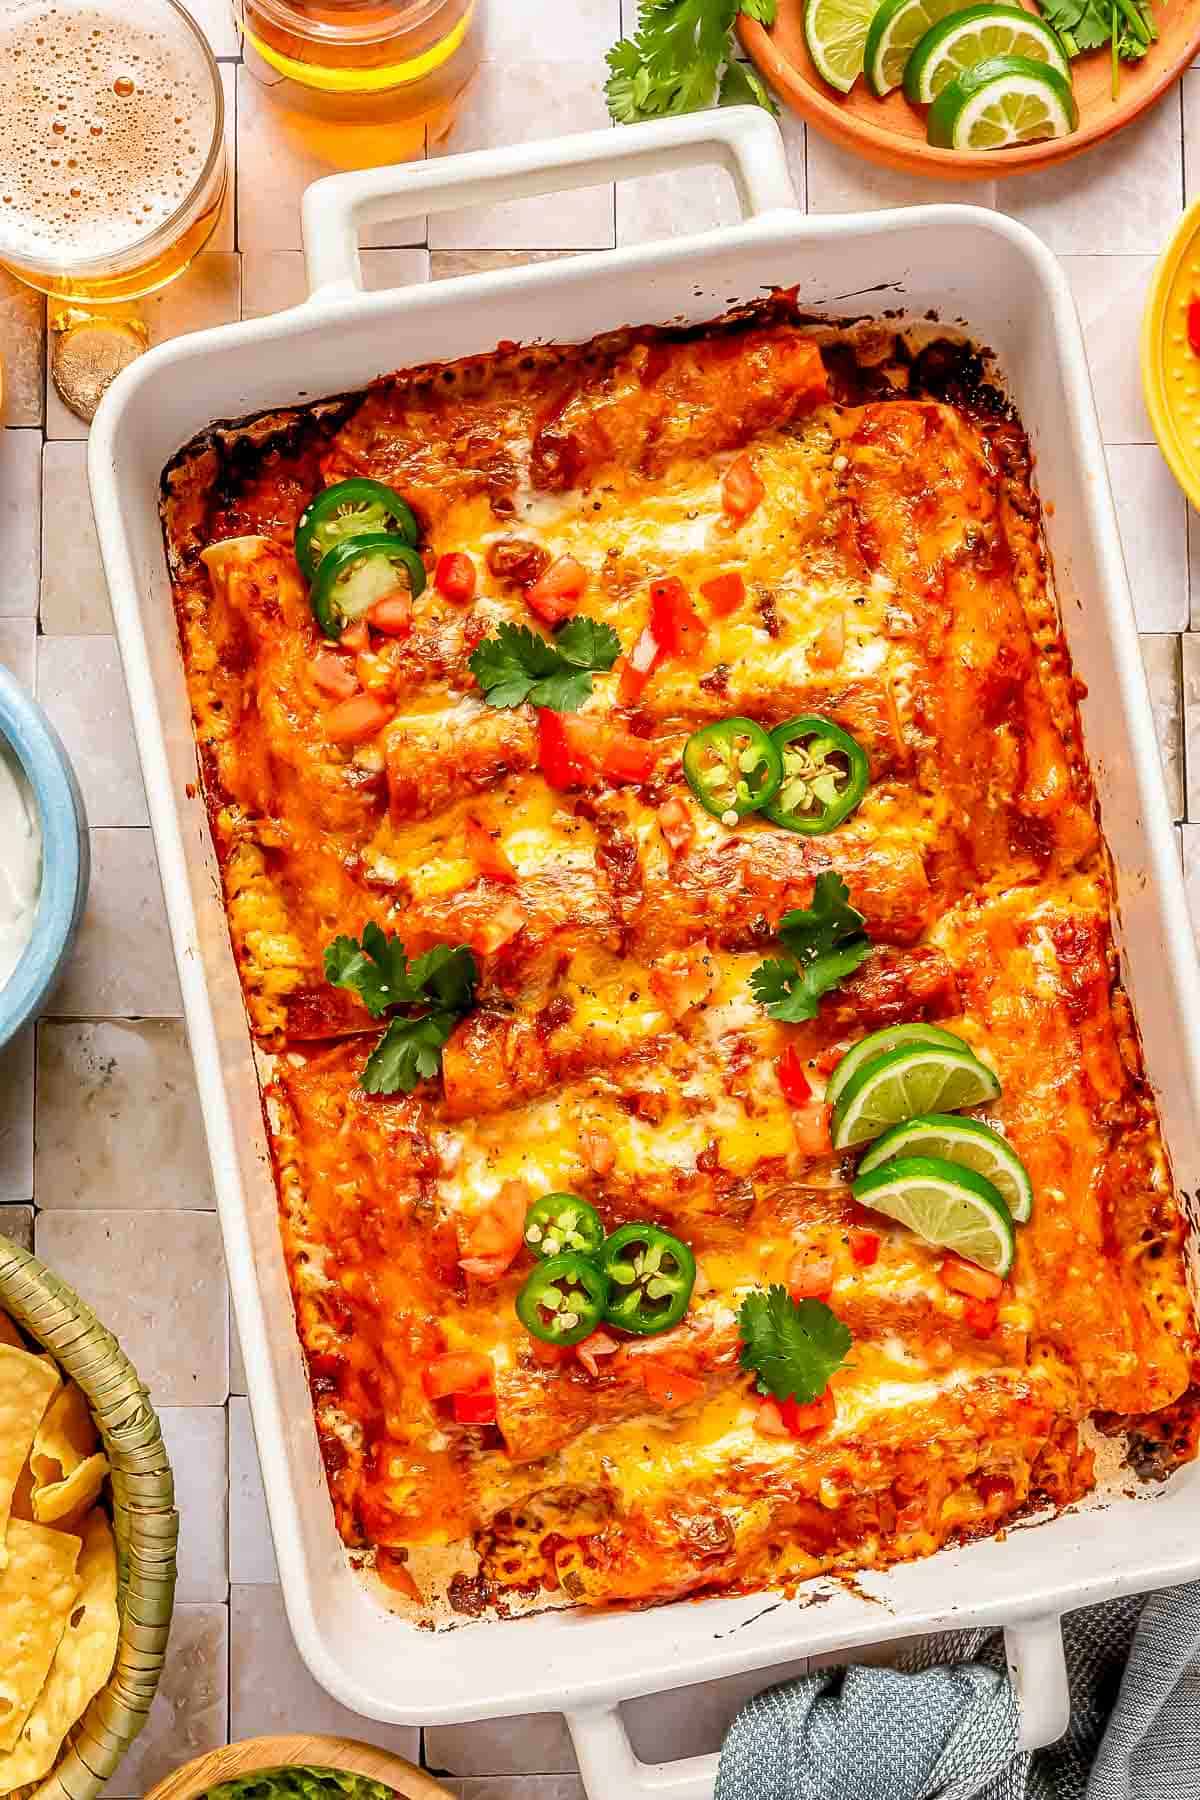 beef enchiladas in a baking dish topped with cilantro, jalapeños and lime slices next to an alcoholic beverage